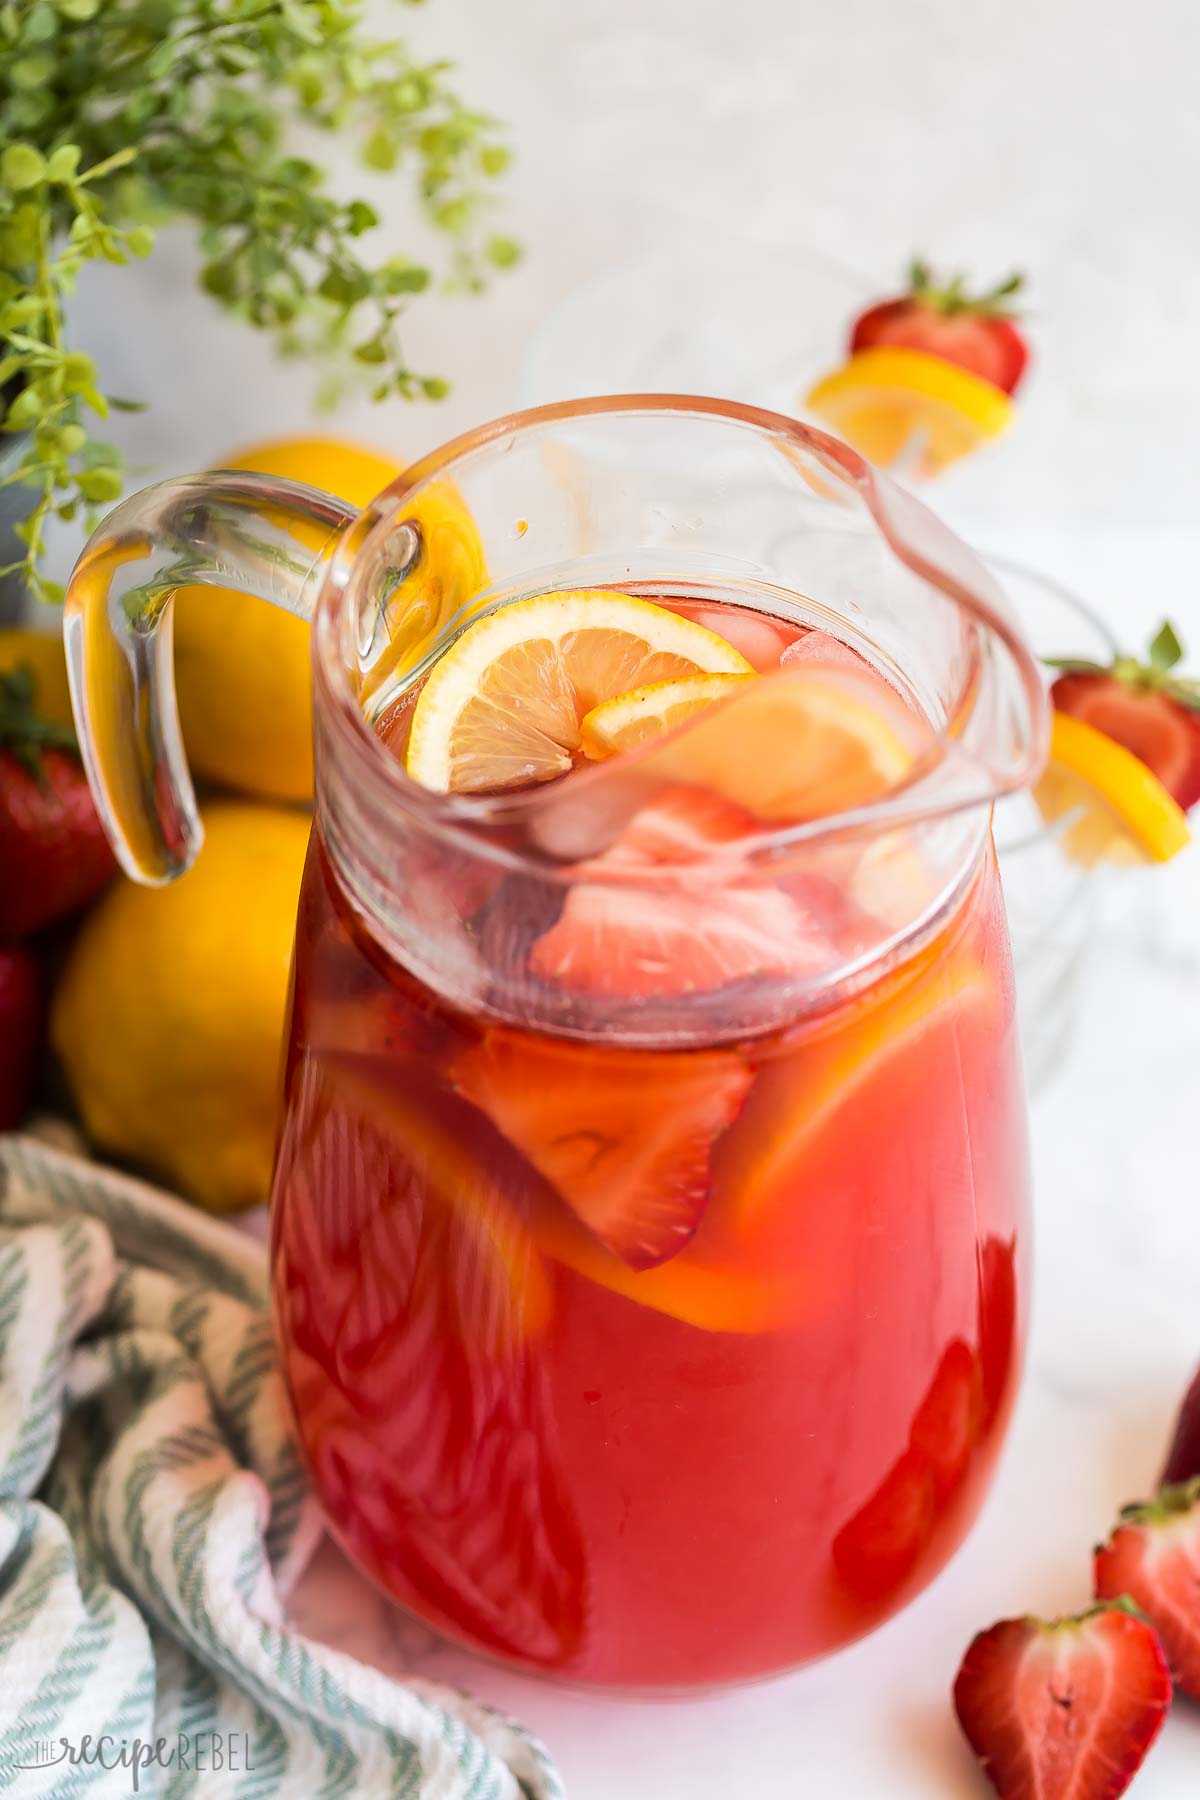 pitcher of strawberry lemonade with ice cubes lemon slices and sliced strawberries.